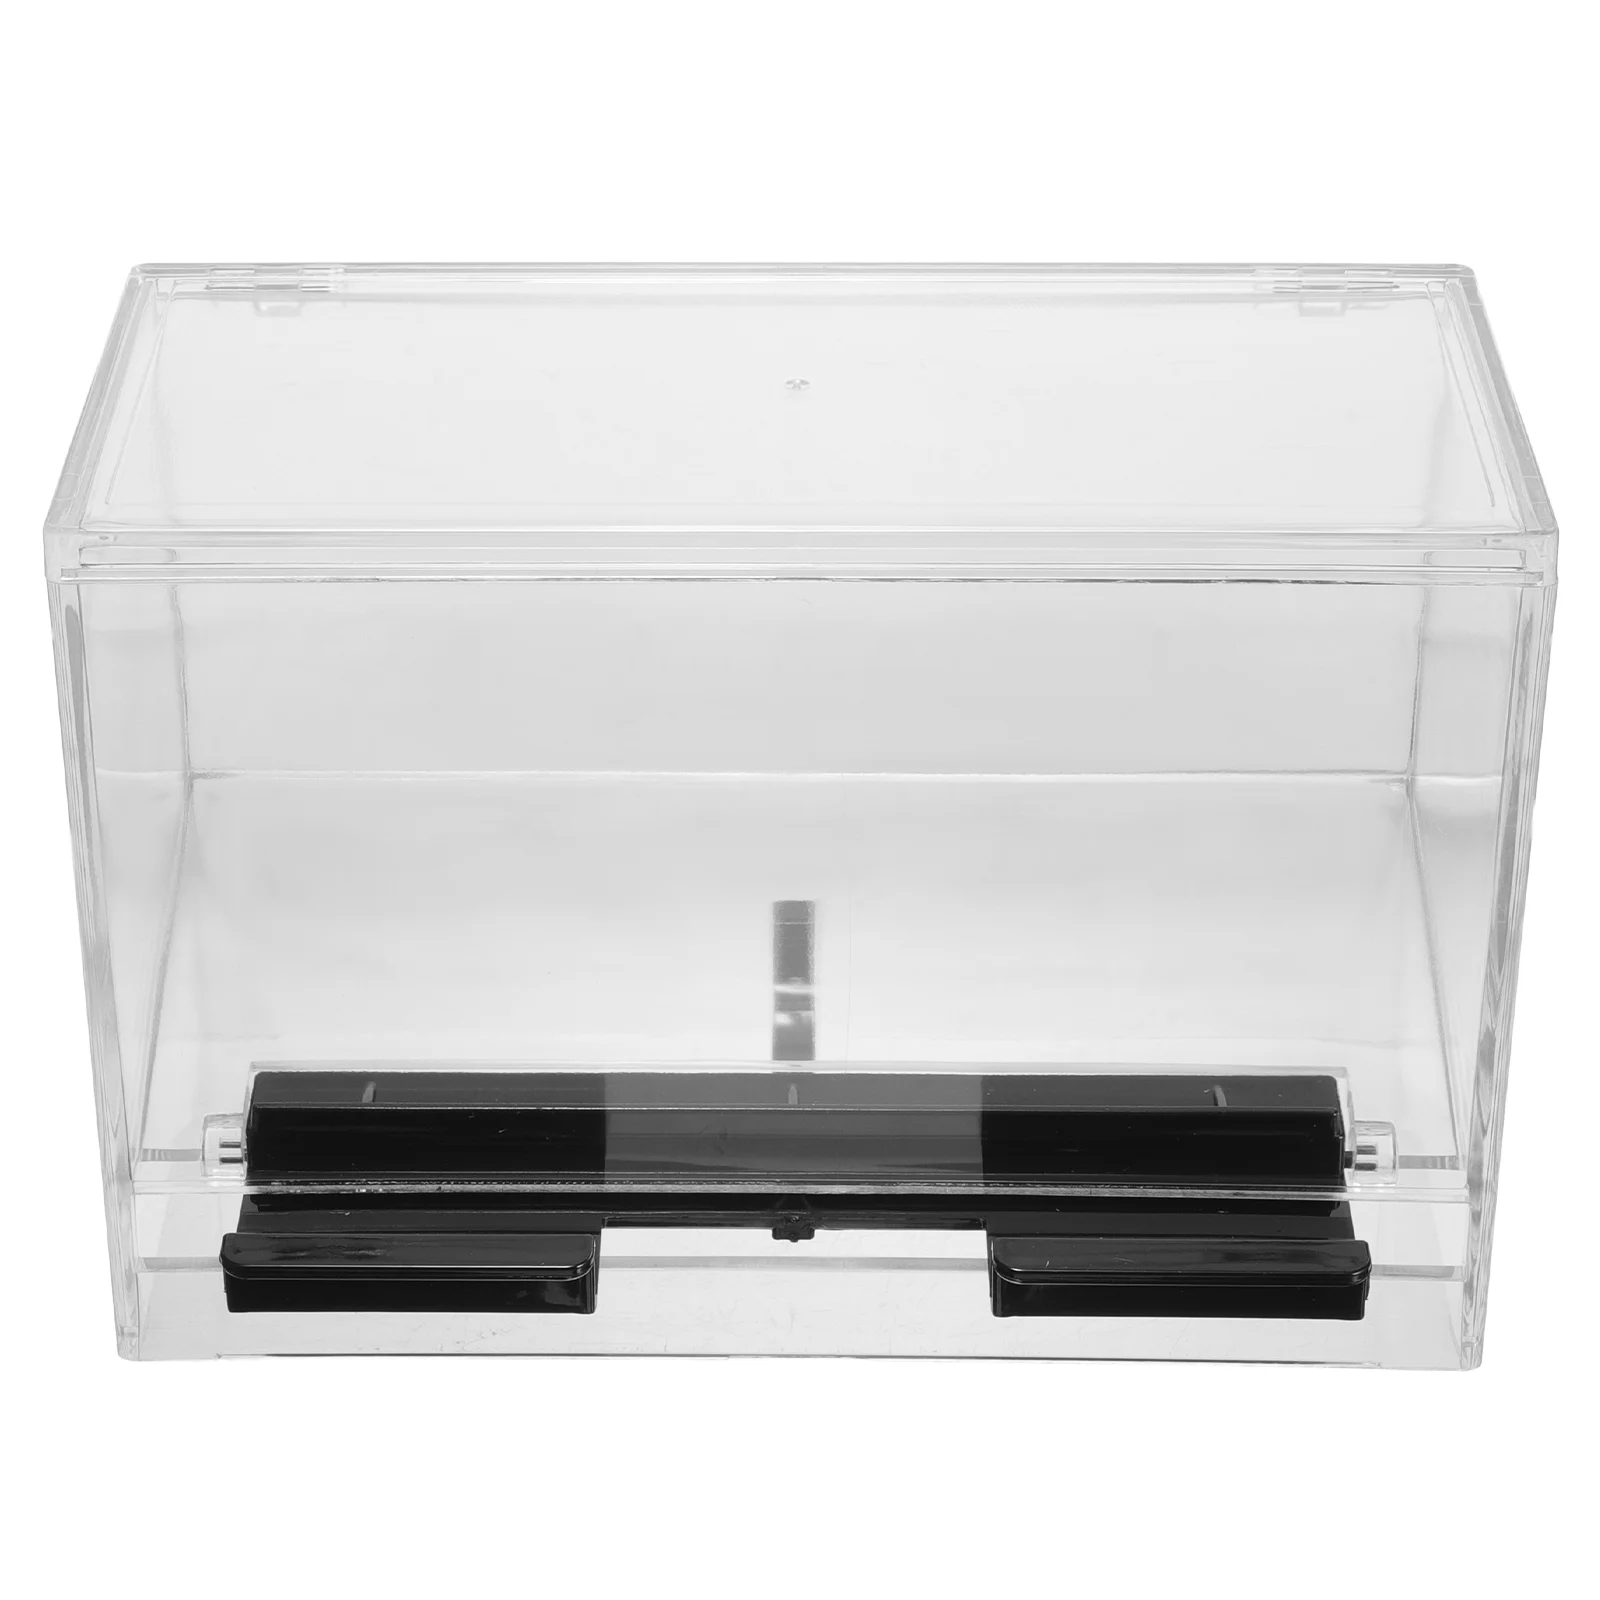 

Self-service Straw Box Clear Plastic Containers Restaurant Holder Dispenser Drinking Dispensers Bracket Acrylic Case